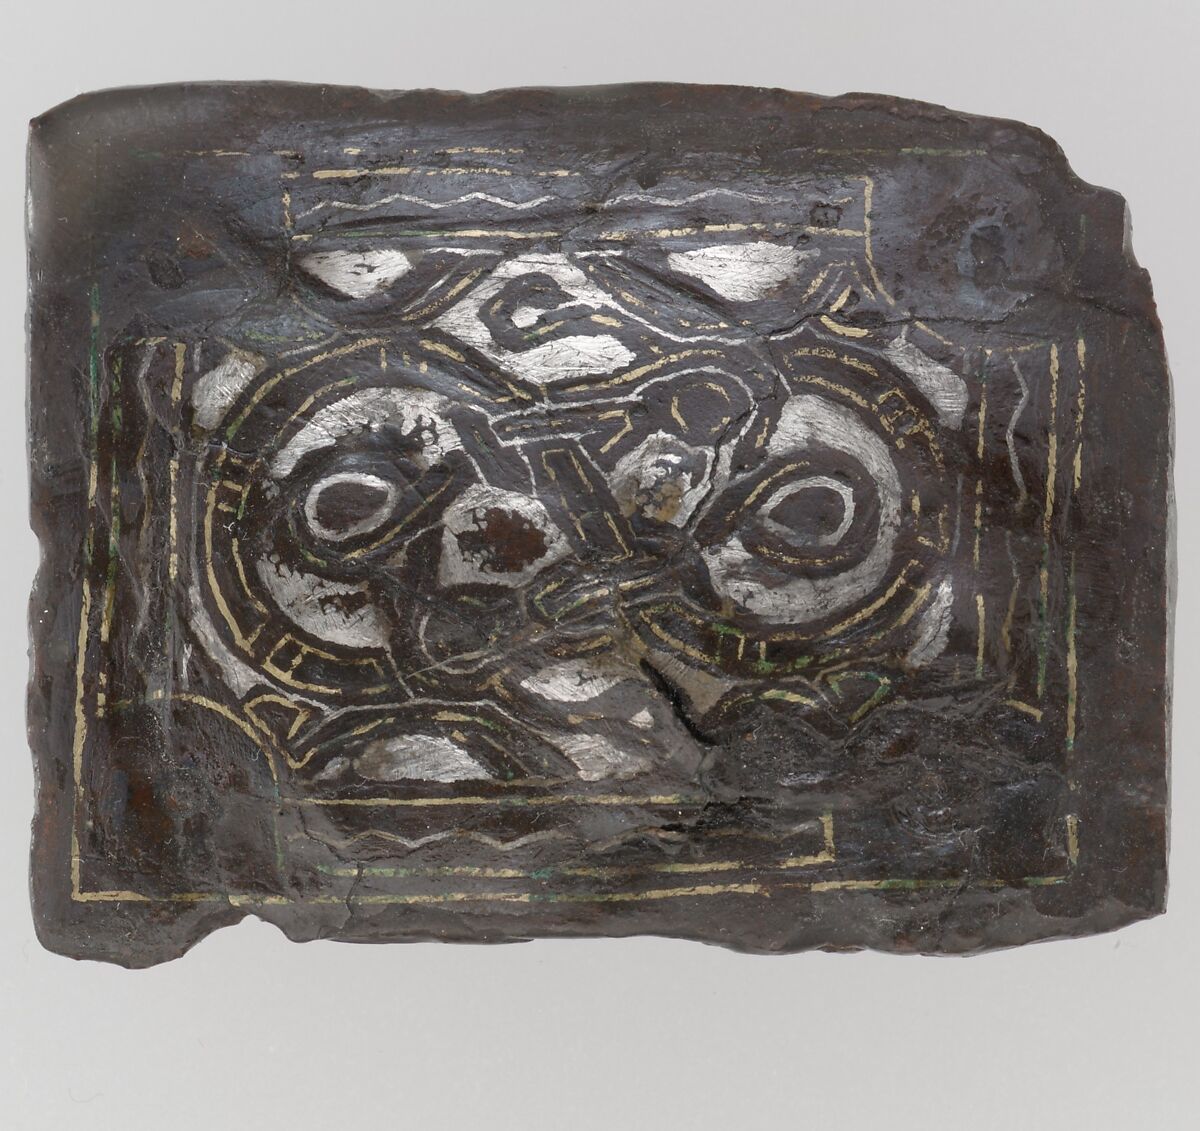 Square Plaque, Iron with silver and copper alloy inlays, Frankish 